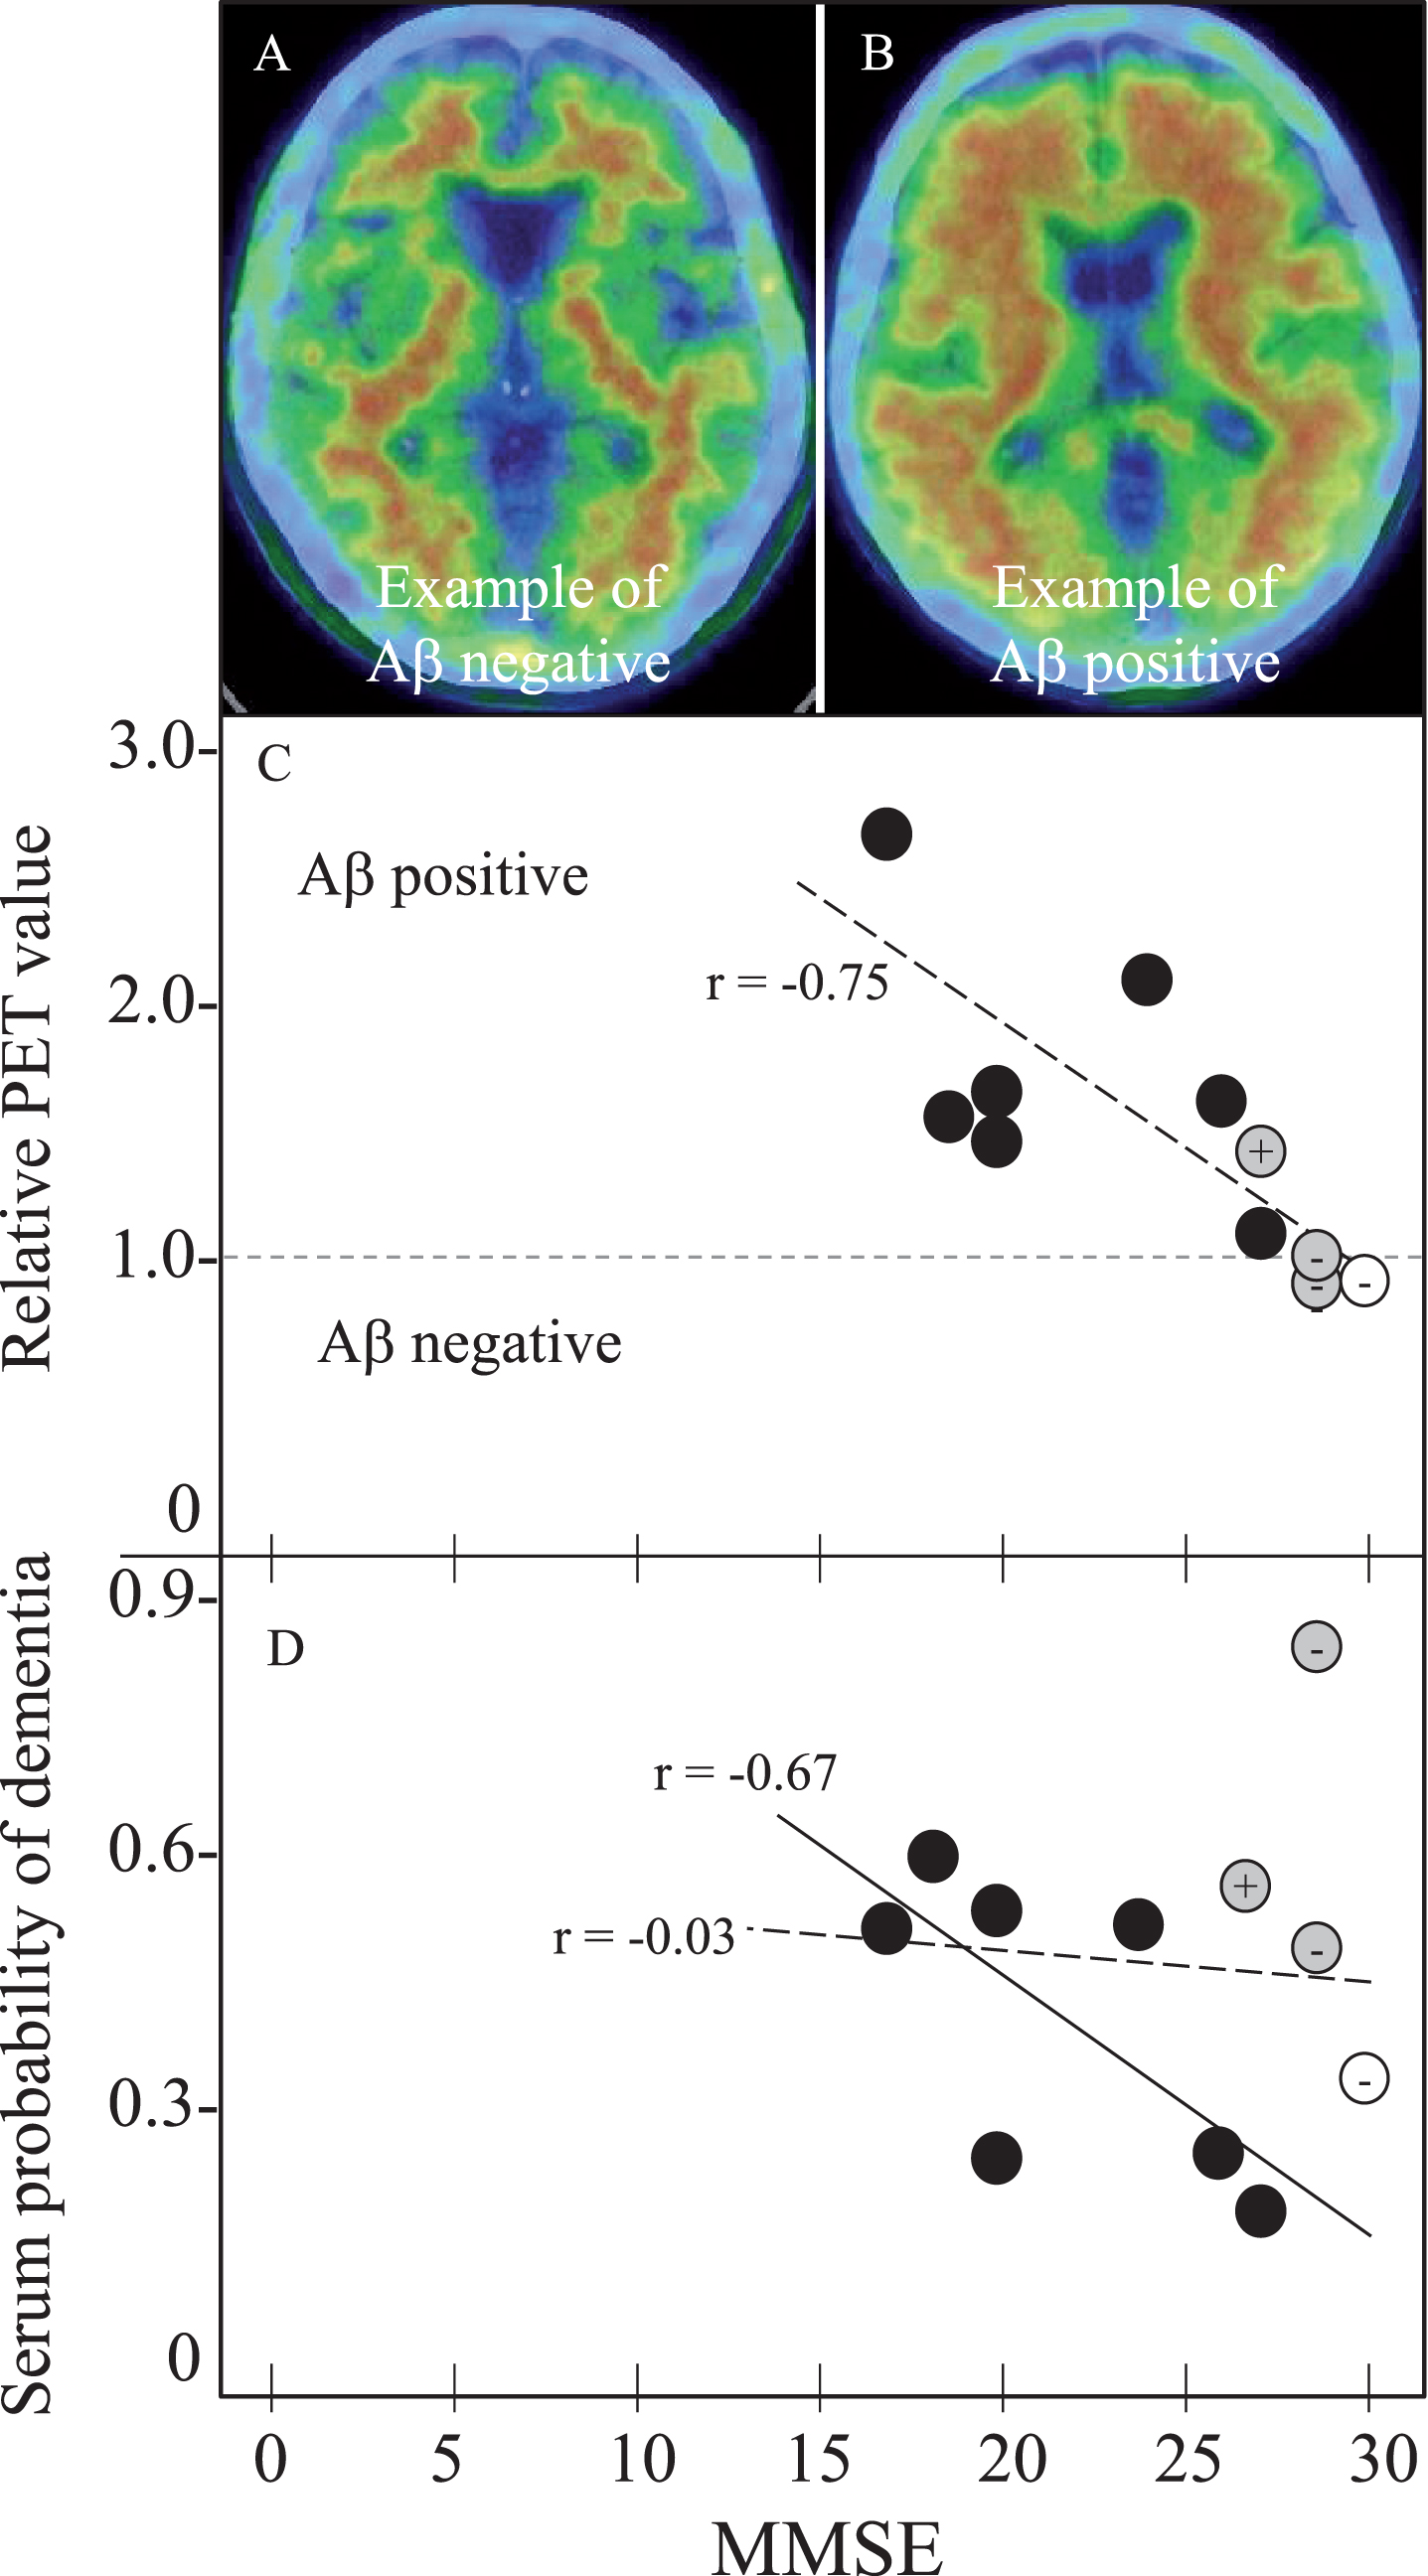 Amyloid PET and SPD with MMSE in 11 PET subjects for 1 NC, 3 MCI, and 7 AD. Panels A and B shows Aβ negative- and positive-example, (C) MMSE versus relative PET value of negative with 1 or less and positive with more than 1, and (D) MMSE versus SPD. Note the cortical Aβ deposit in PET-positive example (B), the strong correlation of relative PET value with MMSE in all 11 subjects (r = –0.75, p = 0.0070, panel C, oblique dotted line), and a significant correlation of SPD with MMSE in 7 AD patients (r = –0.67, p = 0.0908, panel D, oblique dotted line). Correlation coefficient of SPD versus MMSE was r = –0.03, p = 0.9198 for all 11 subjects (D, dotted line). Open circle represents NC, grey MCI, and black AD. + or – of grey MCI and control are Aβ-PET positive or negative, respectively.